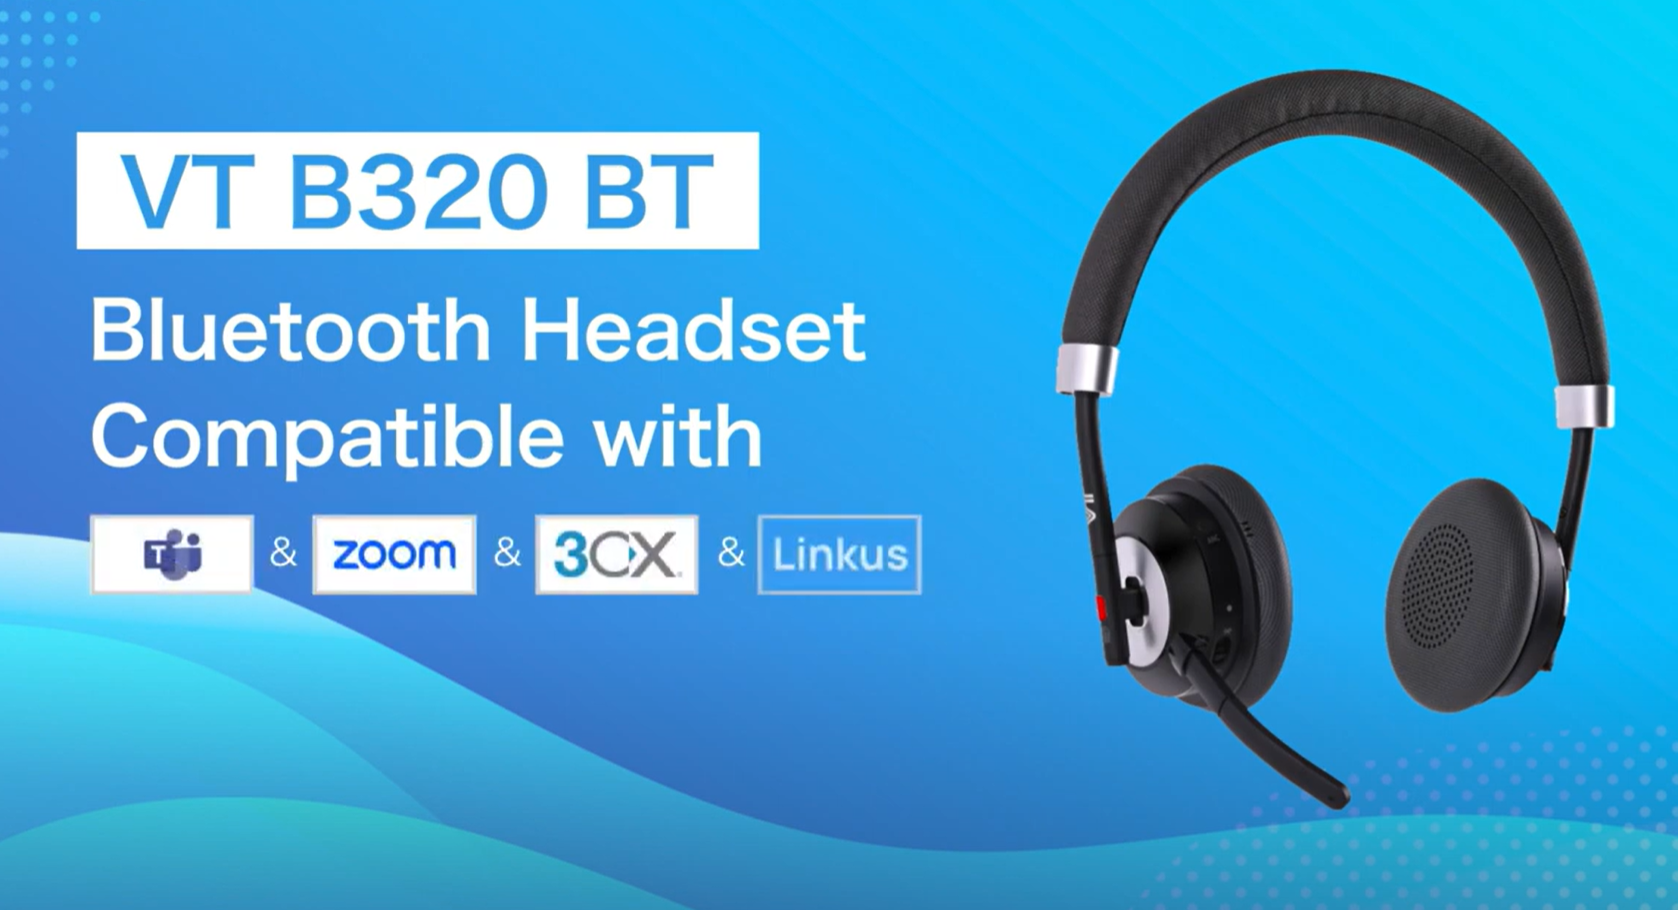 VT B320 Bluetooth Headset compatible with MS Teams, 3CX, Linkus, Zoom